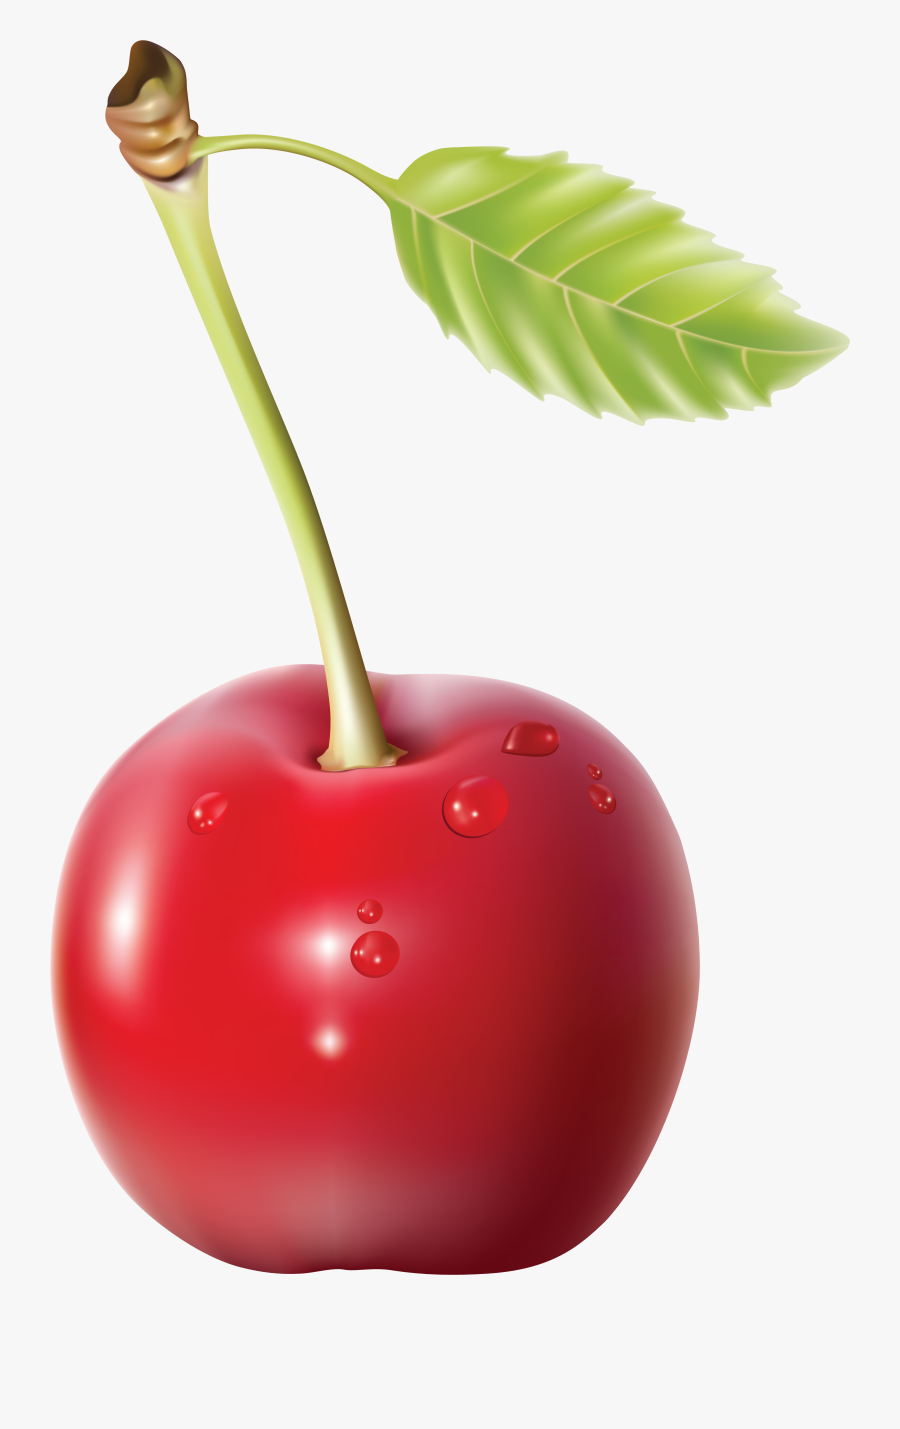 Png Images Free Download - Cherry Png, Transparent Clipart